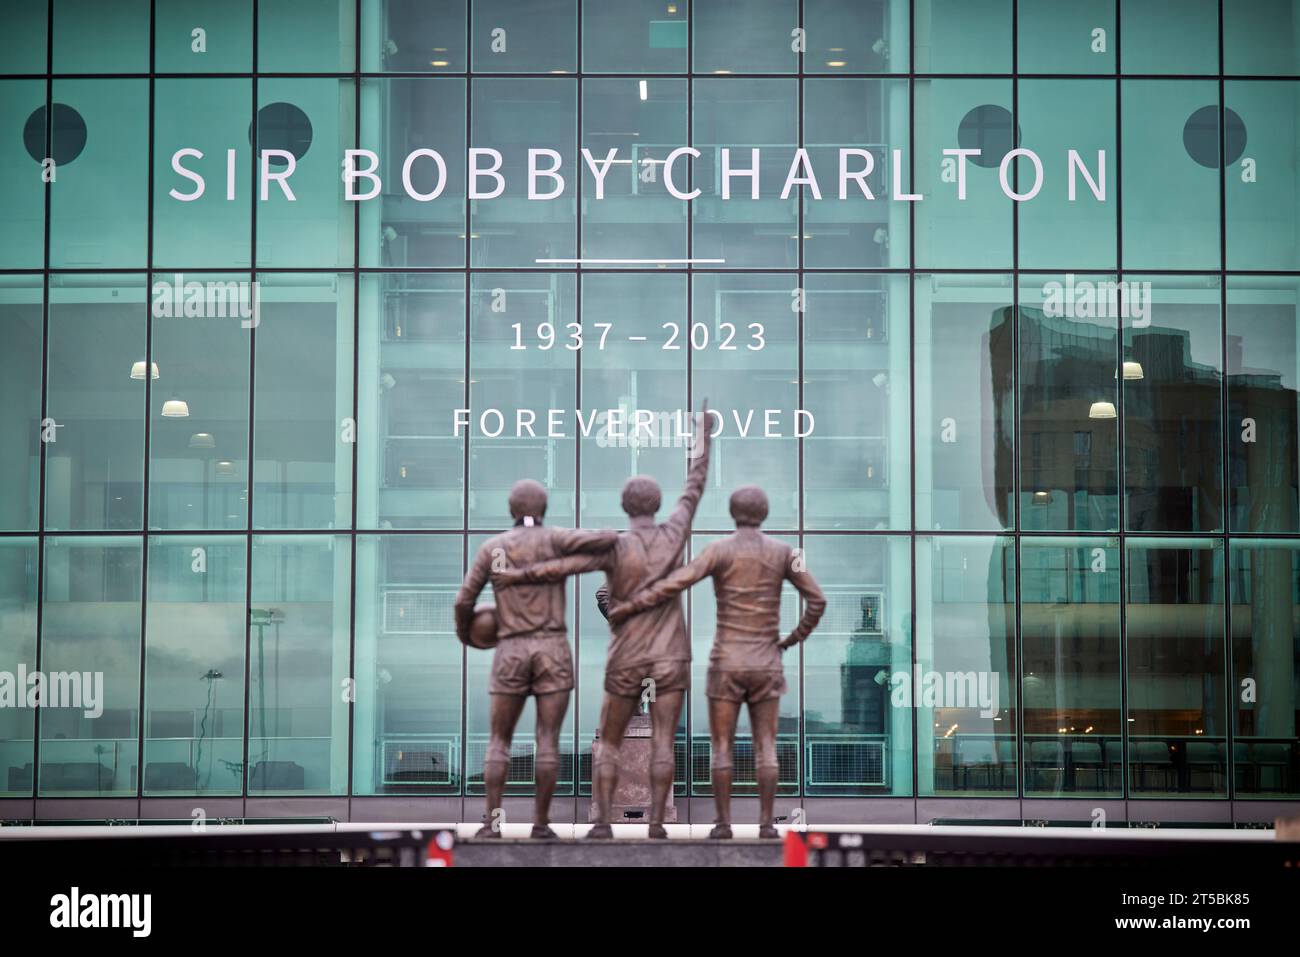 Lo stadio MUFC Manchester United FC rende omaggio a Sir Bobby Charlton Foto Stock